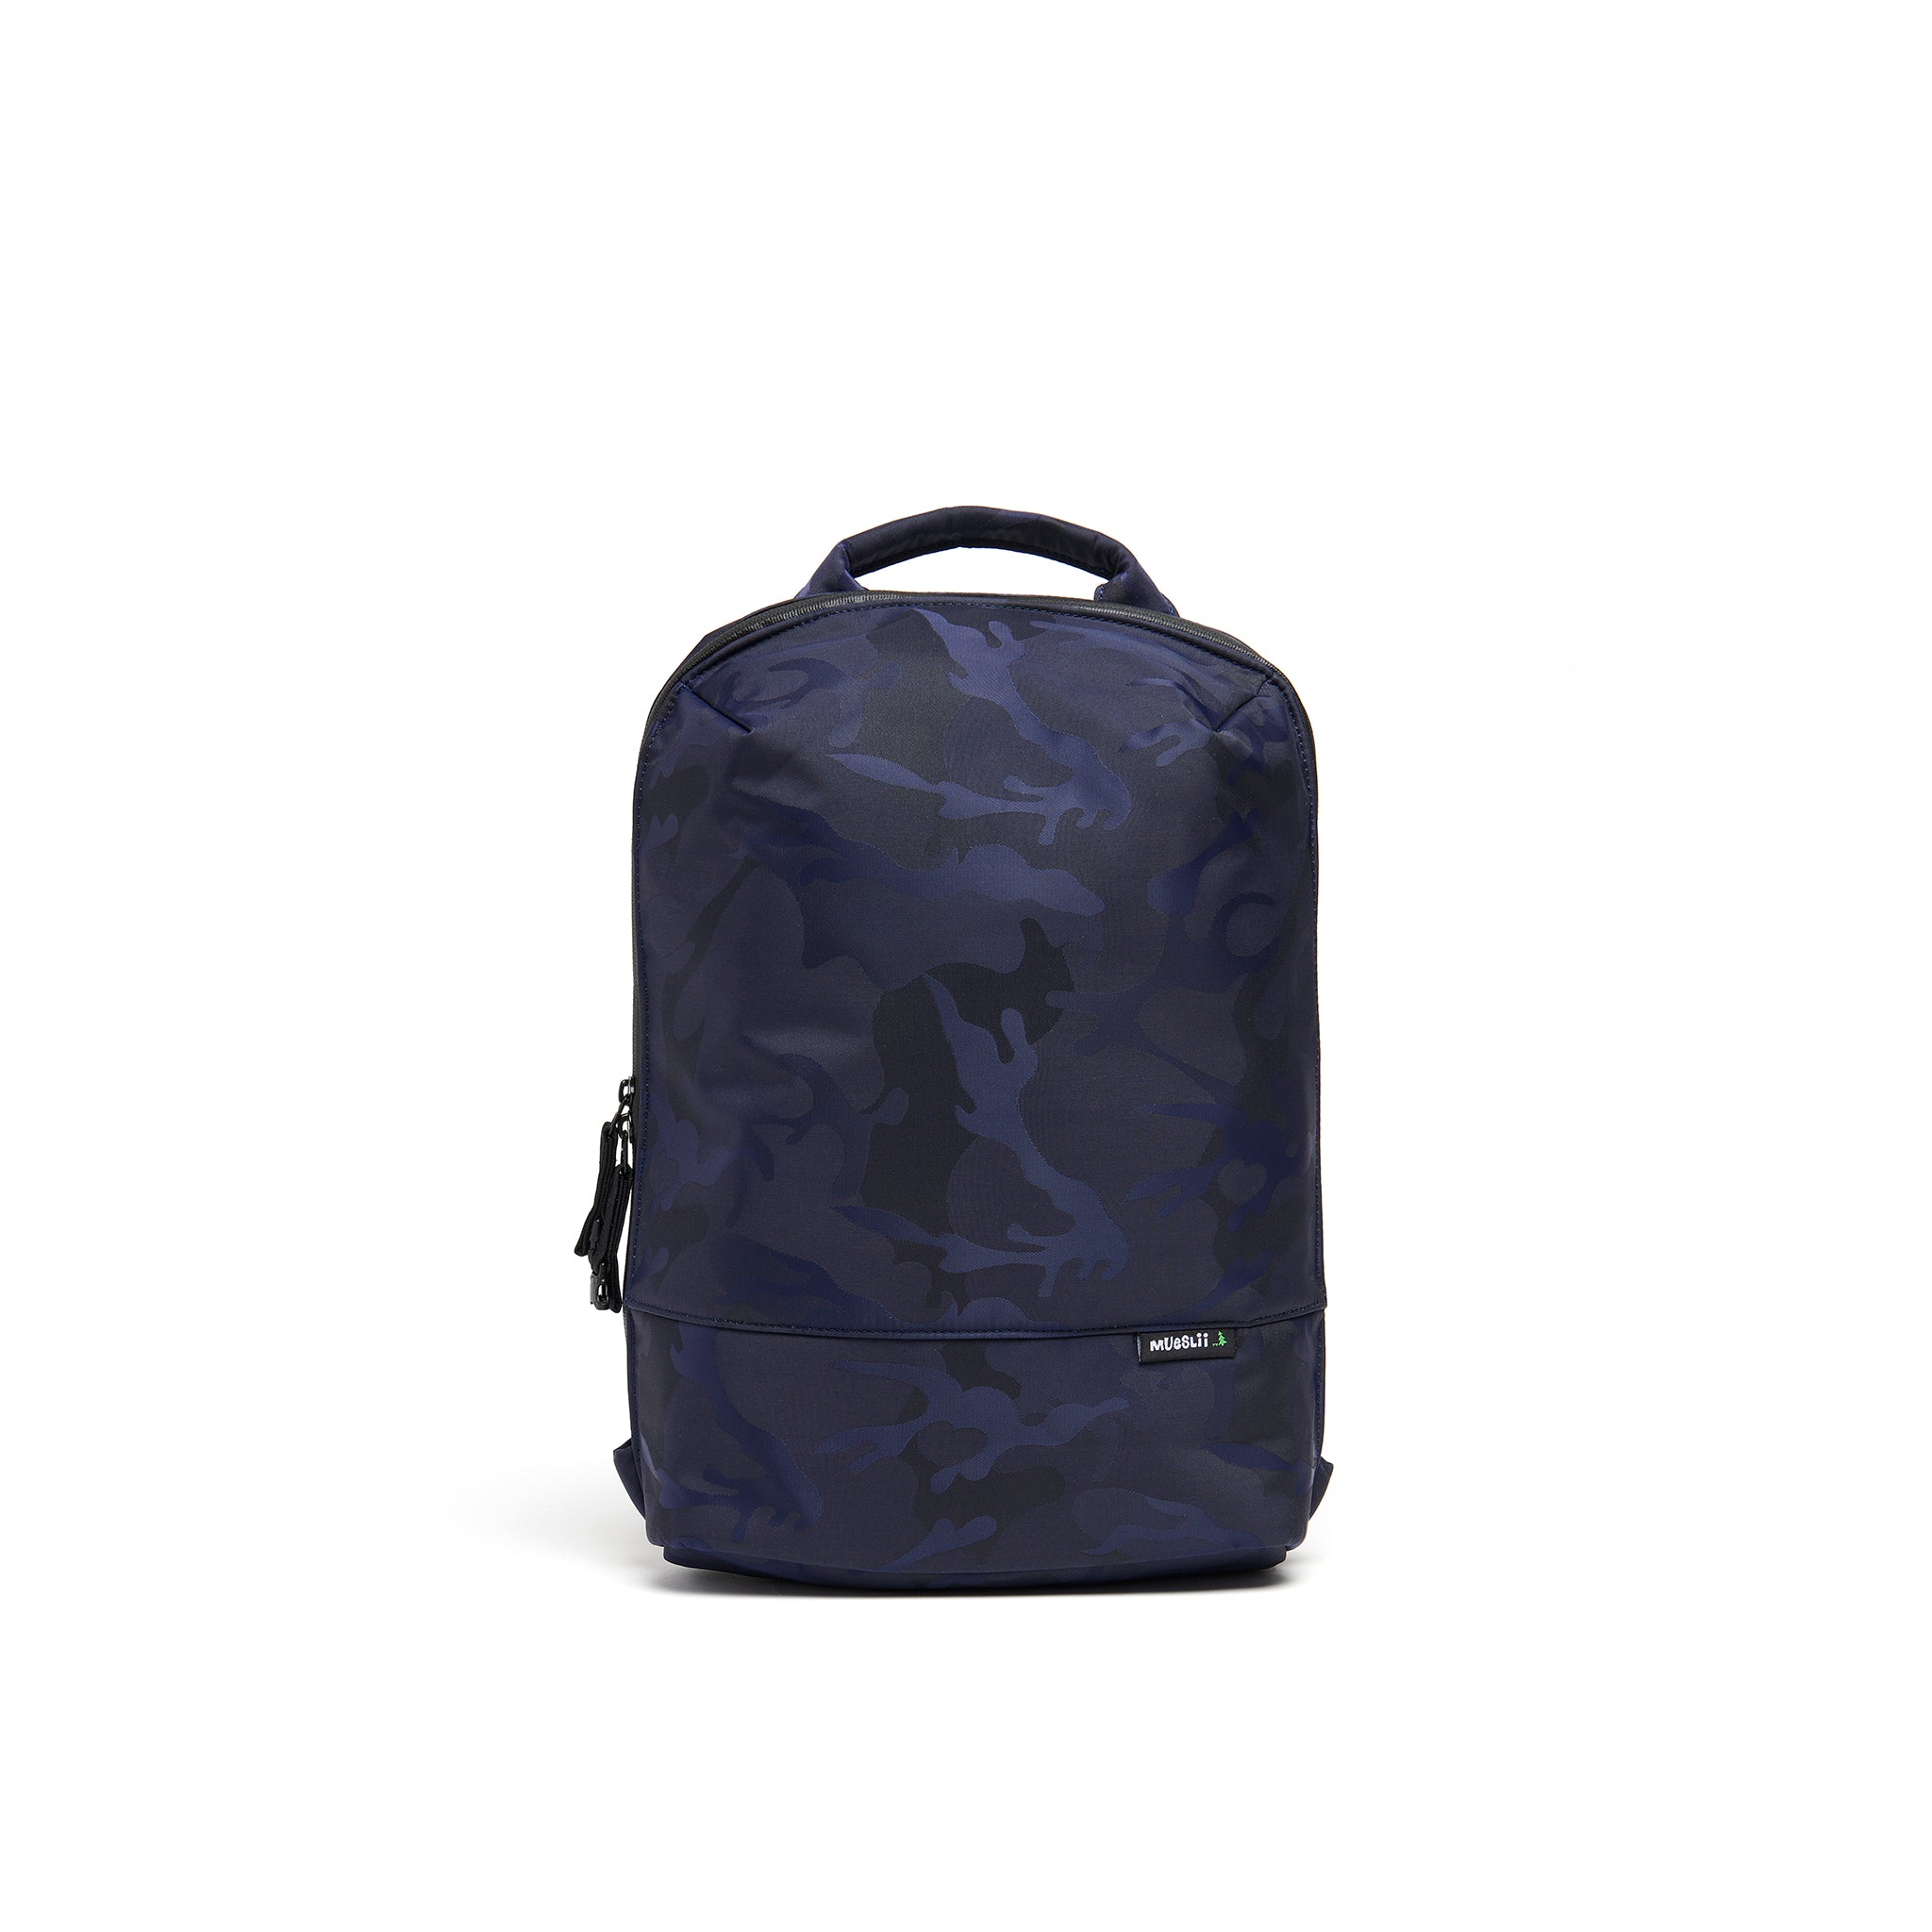 Mueslii small backpack, made of jacquard  waterproof nylon, camouflage pattern, with a laptop compartment, color blue, front view.